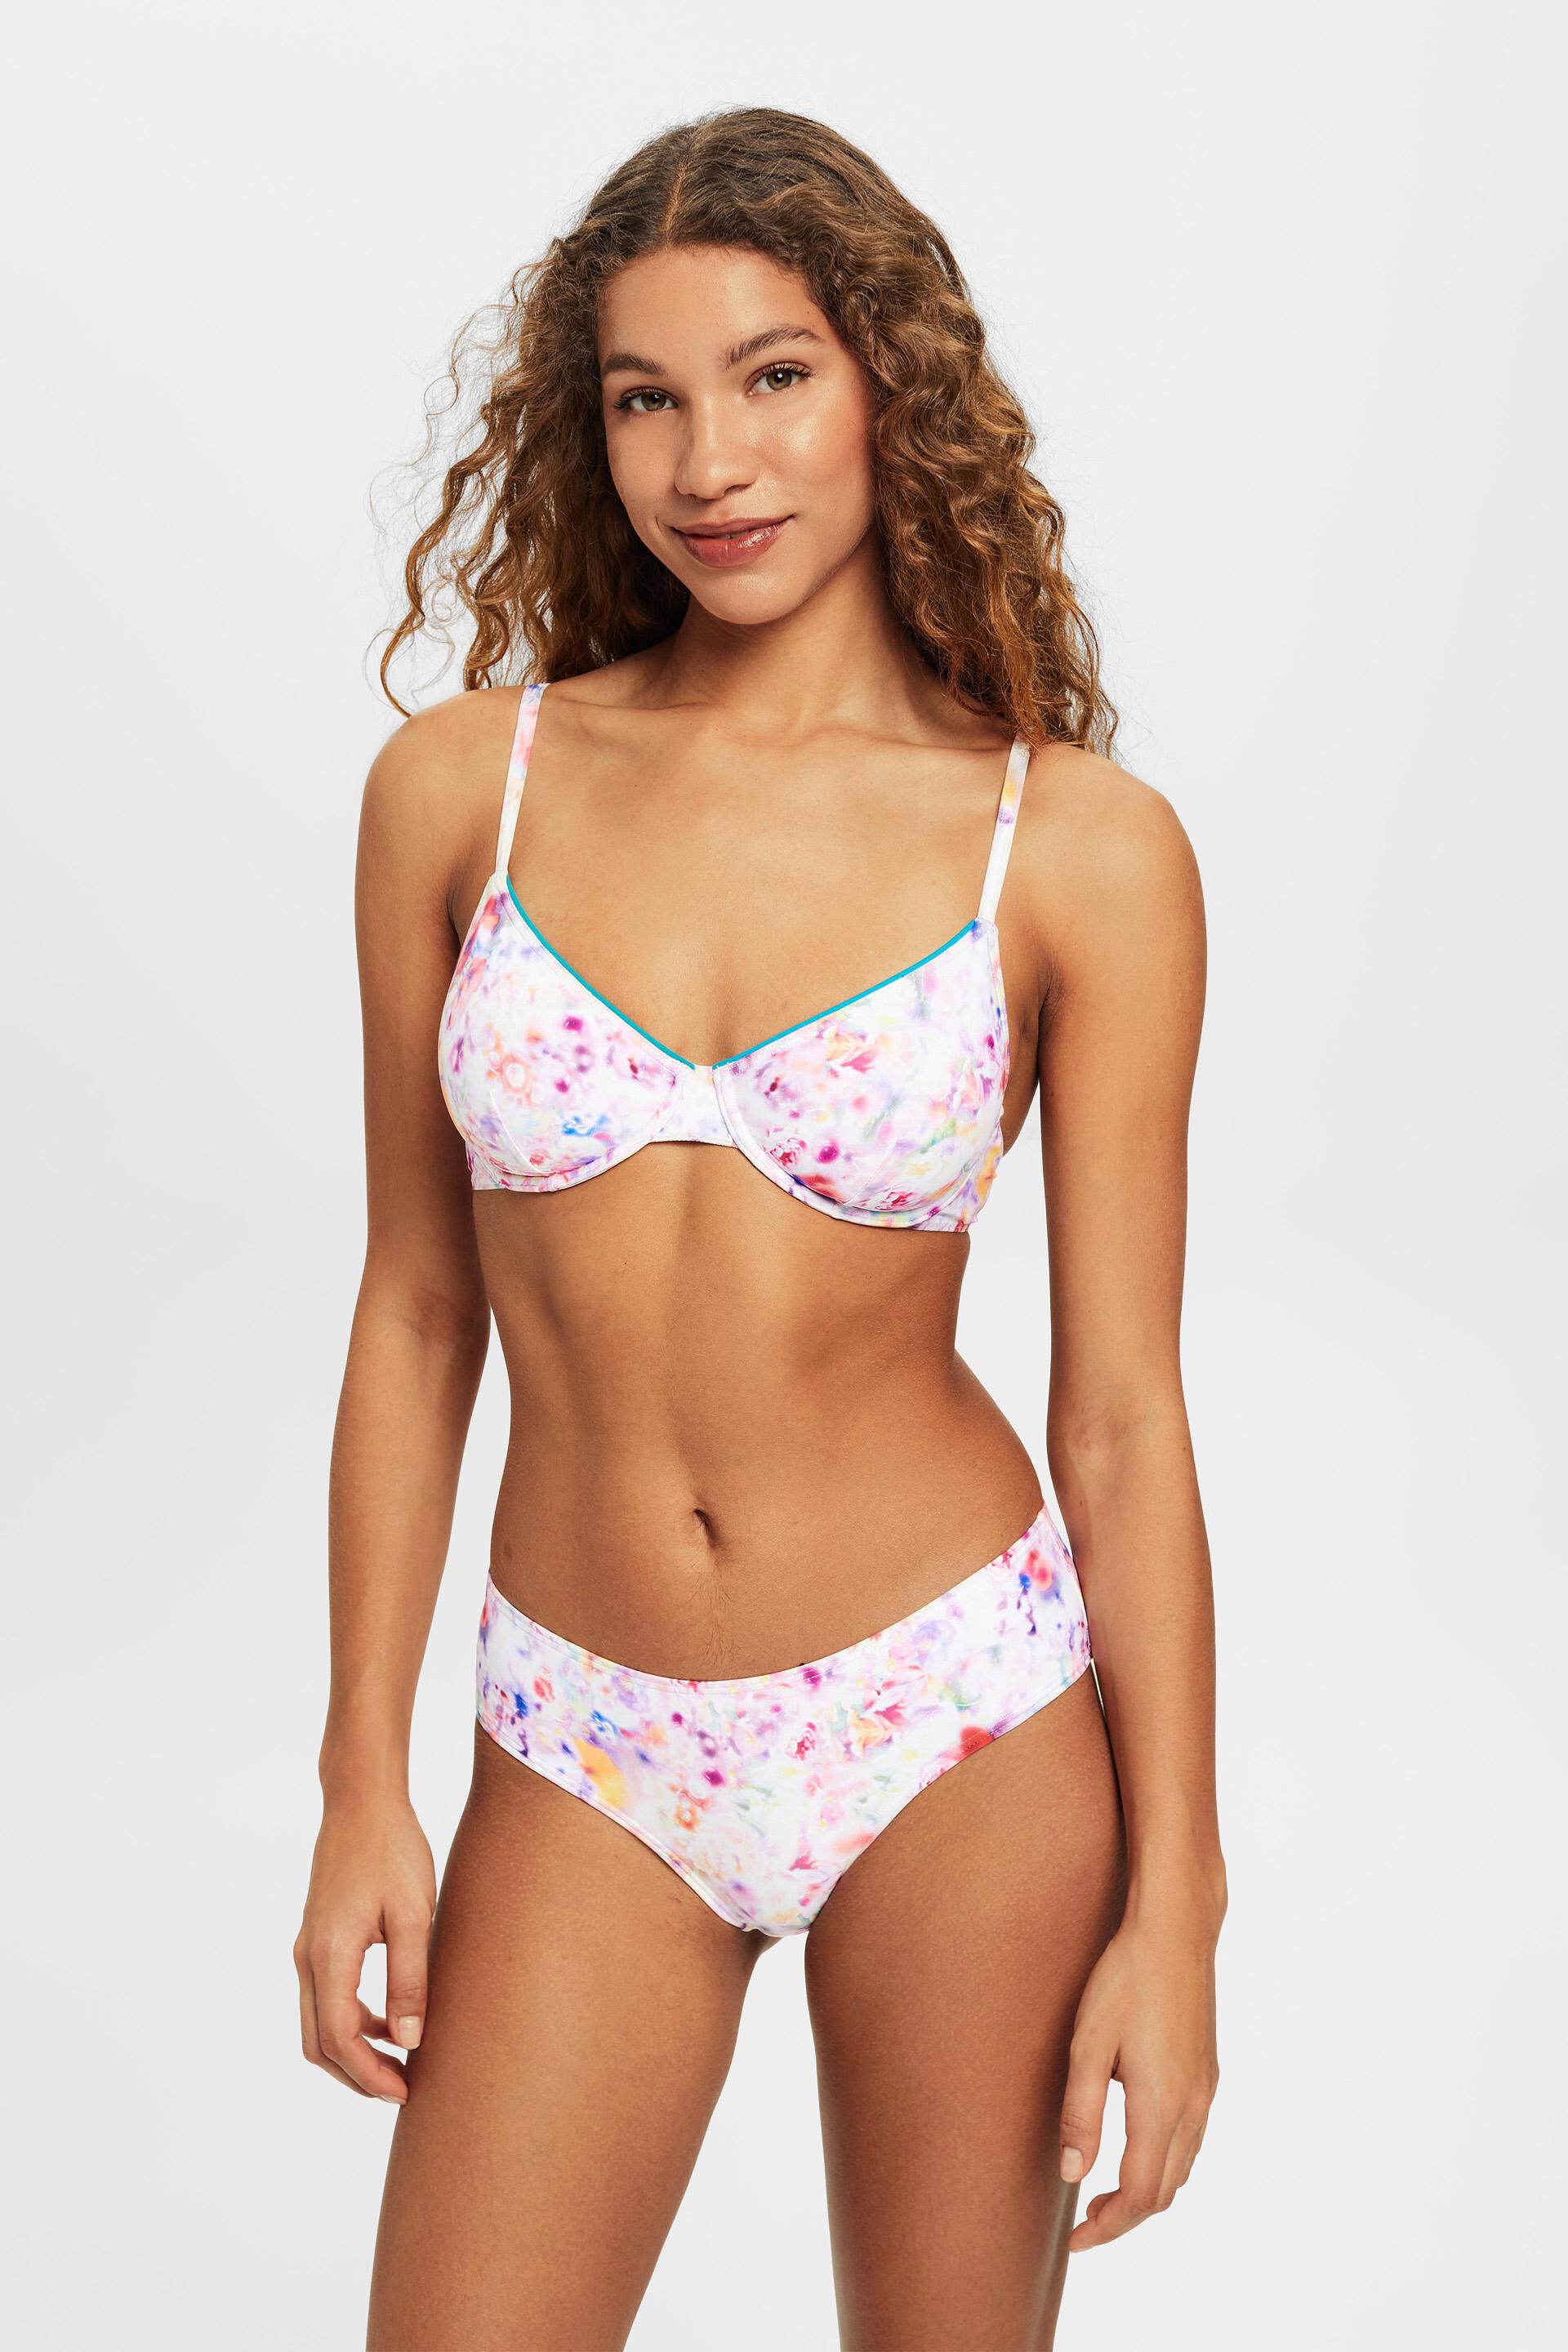 ESPRIT - Underwired bikini top with floral print at our Online Shop